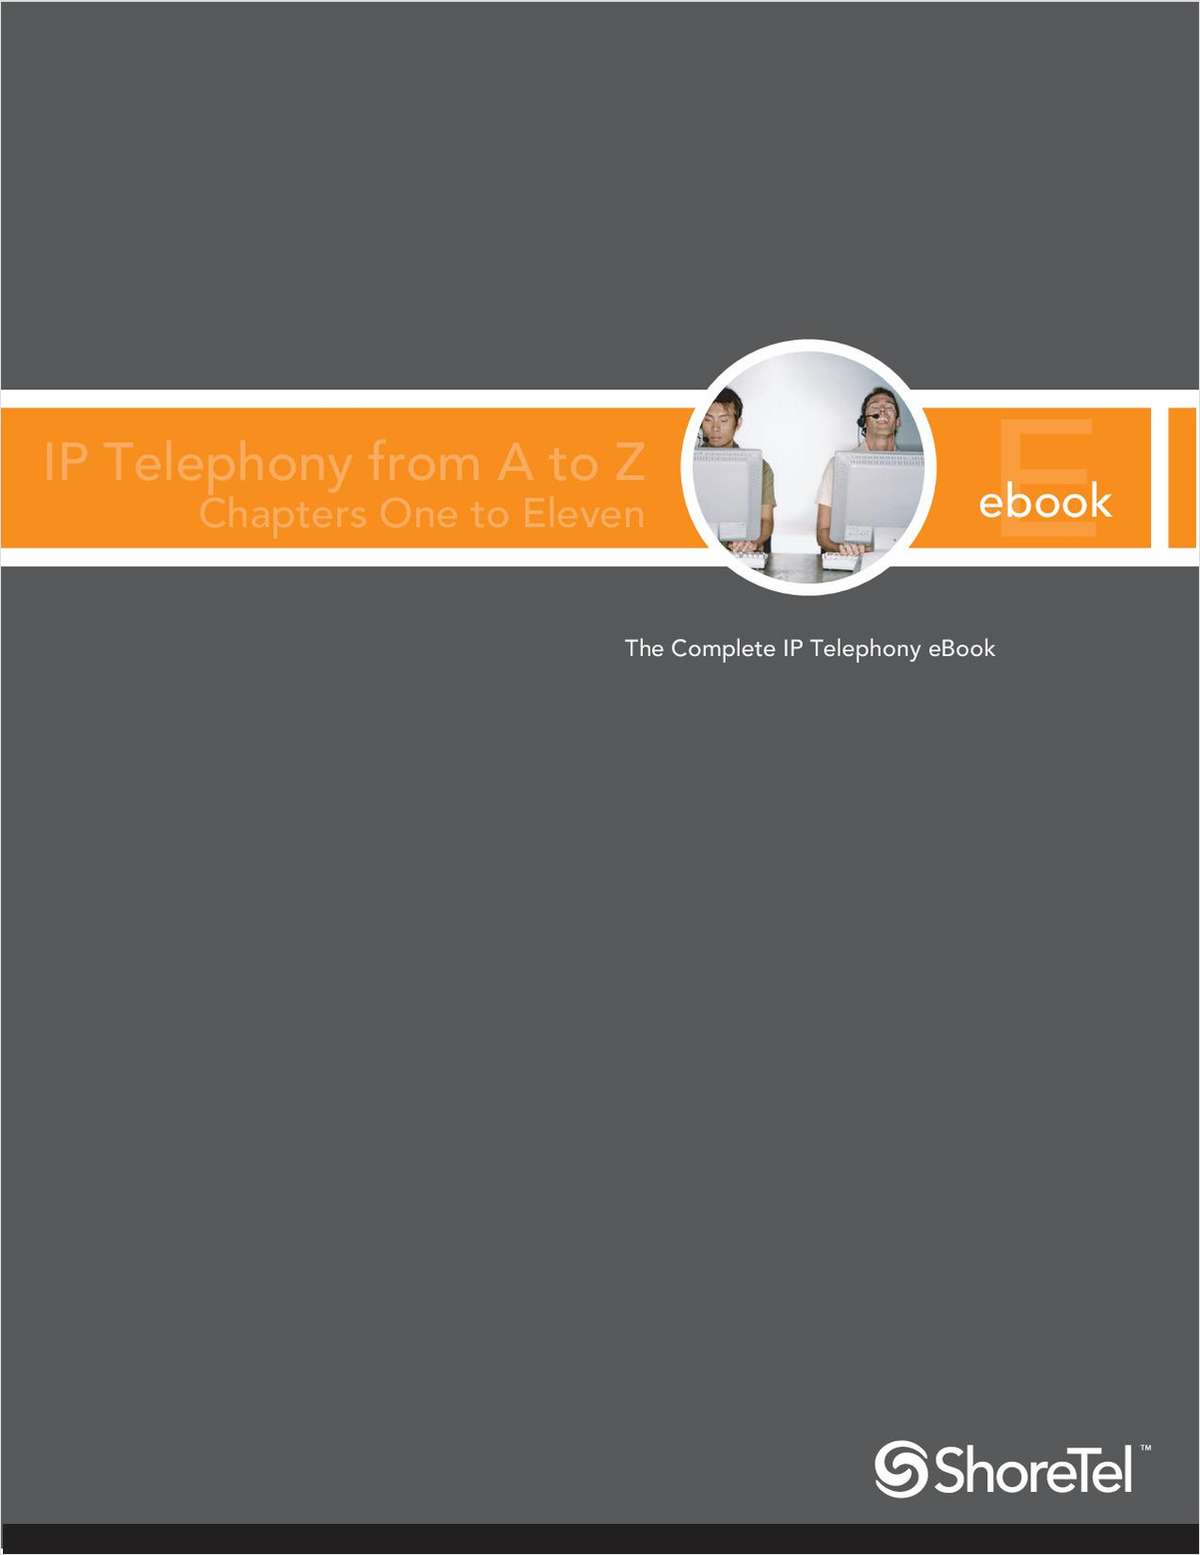 IP Telephony from A-Z  -The Complete IP Telephony eBook